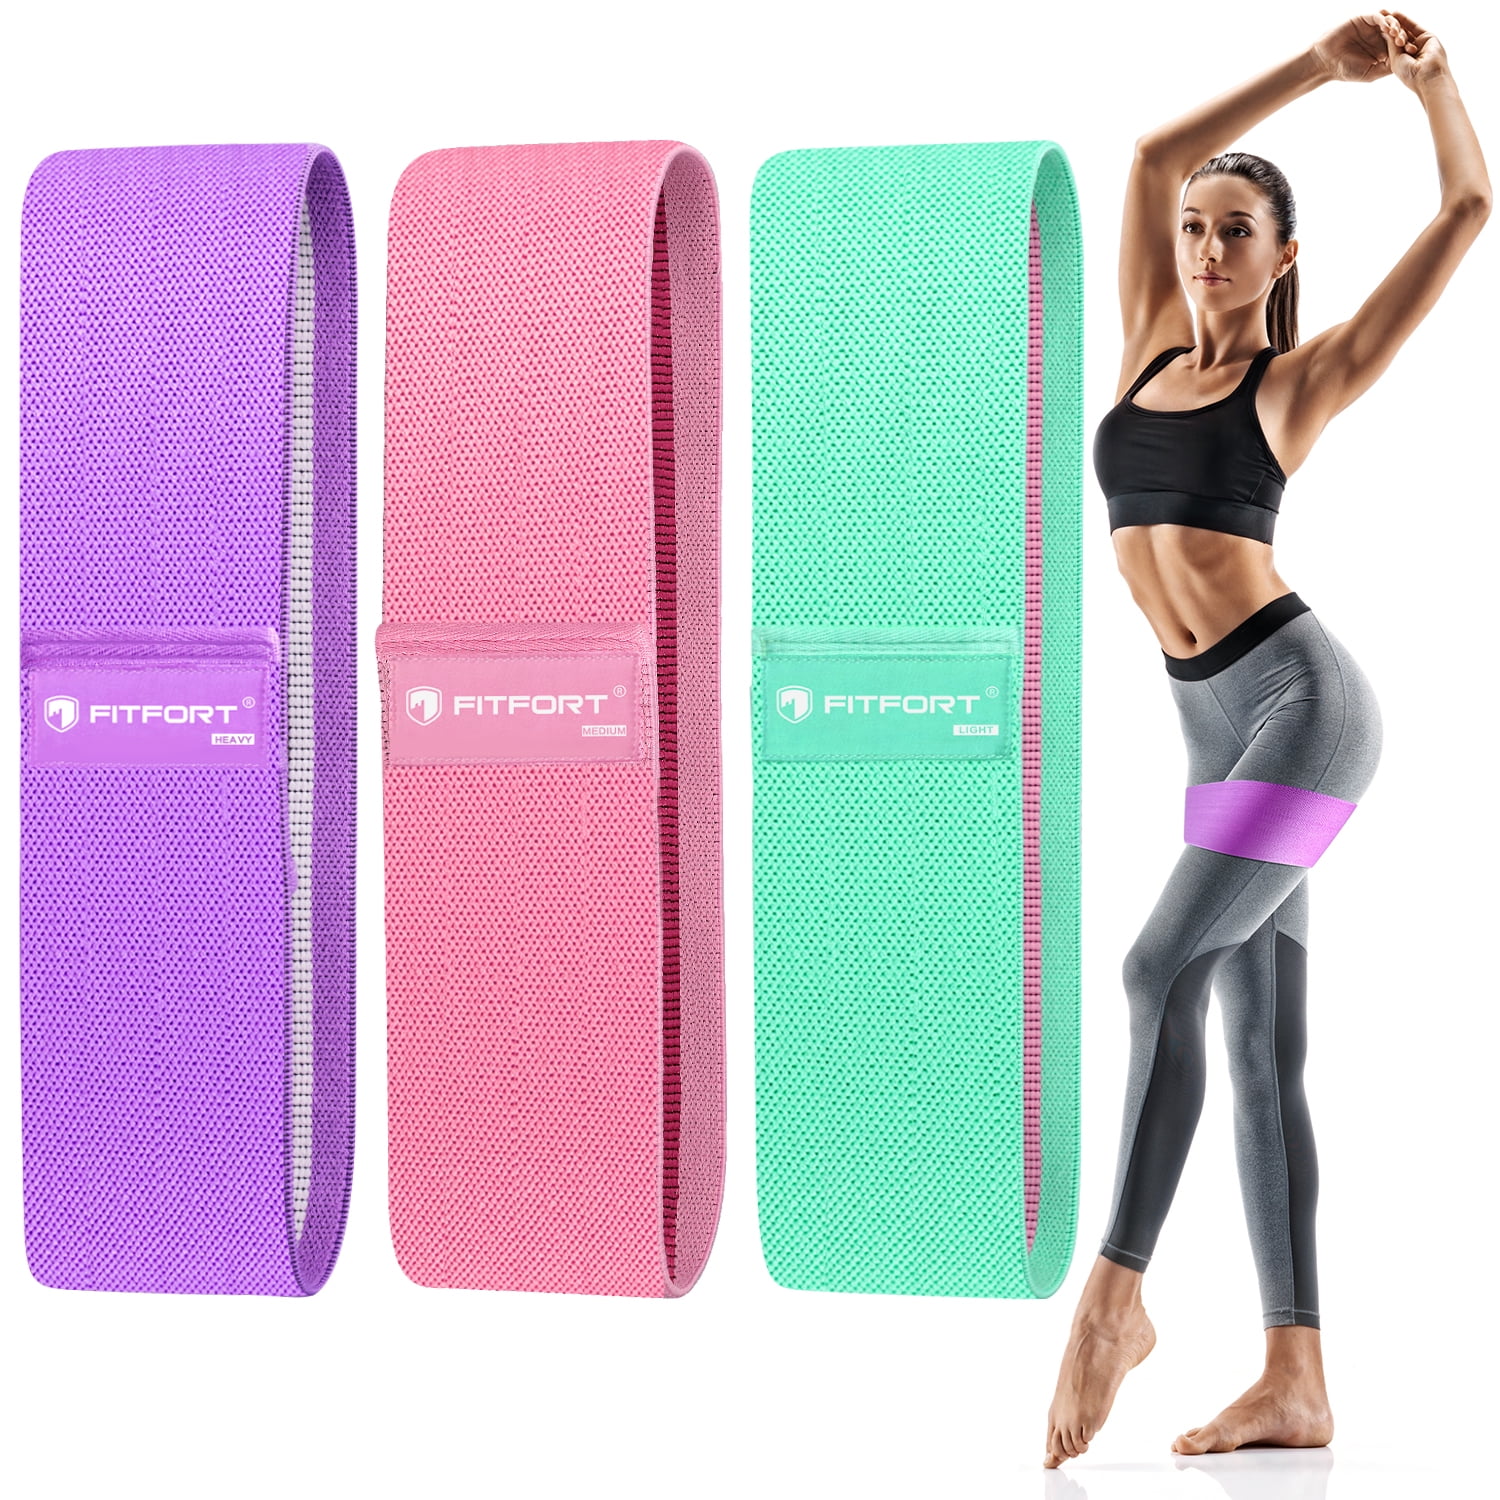 Hip Exercise Bands for Booty & Glute Fitness Non-Slip Heavy Resistance Bands 